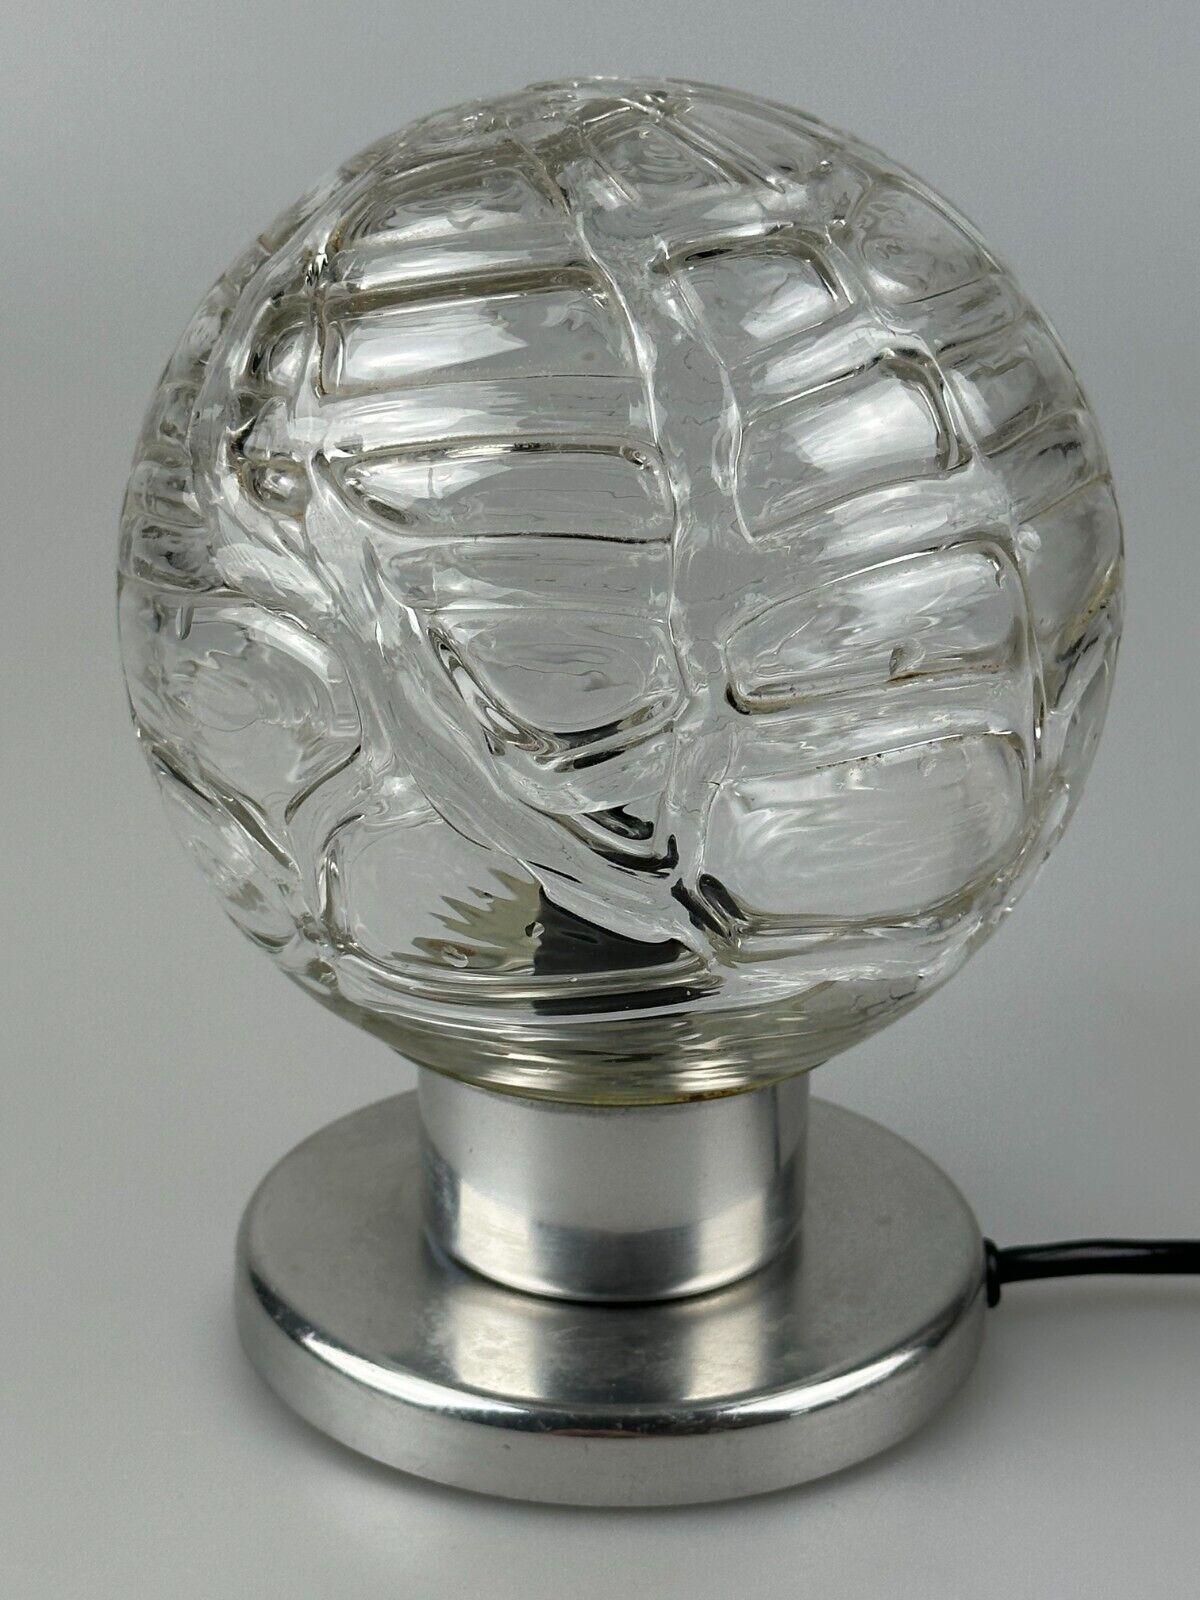 60s 70s table lamp bedside lamp chrome Doria glass space age design In Good Condition For Sale In Neuenkirchen, NI